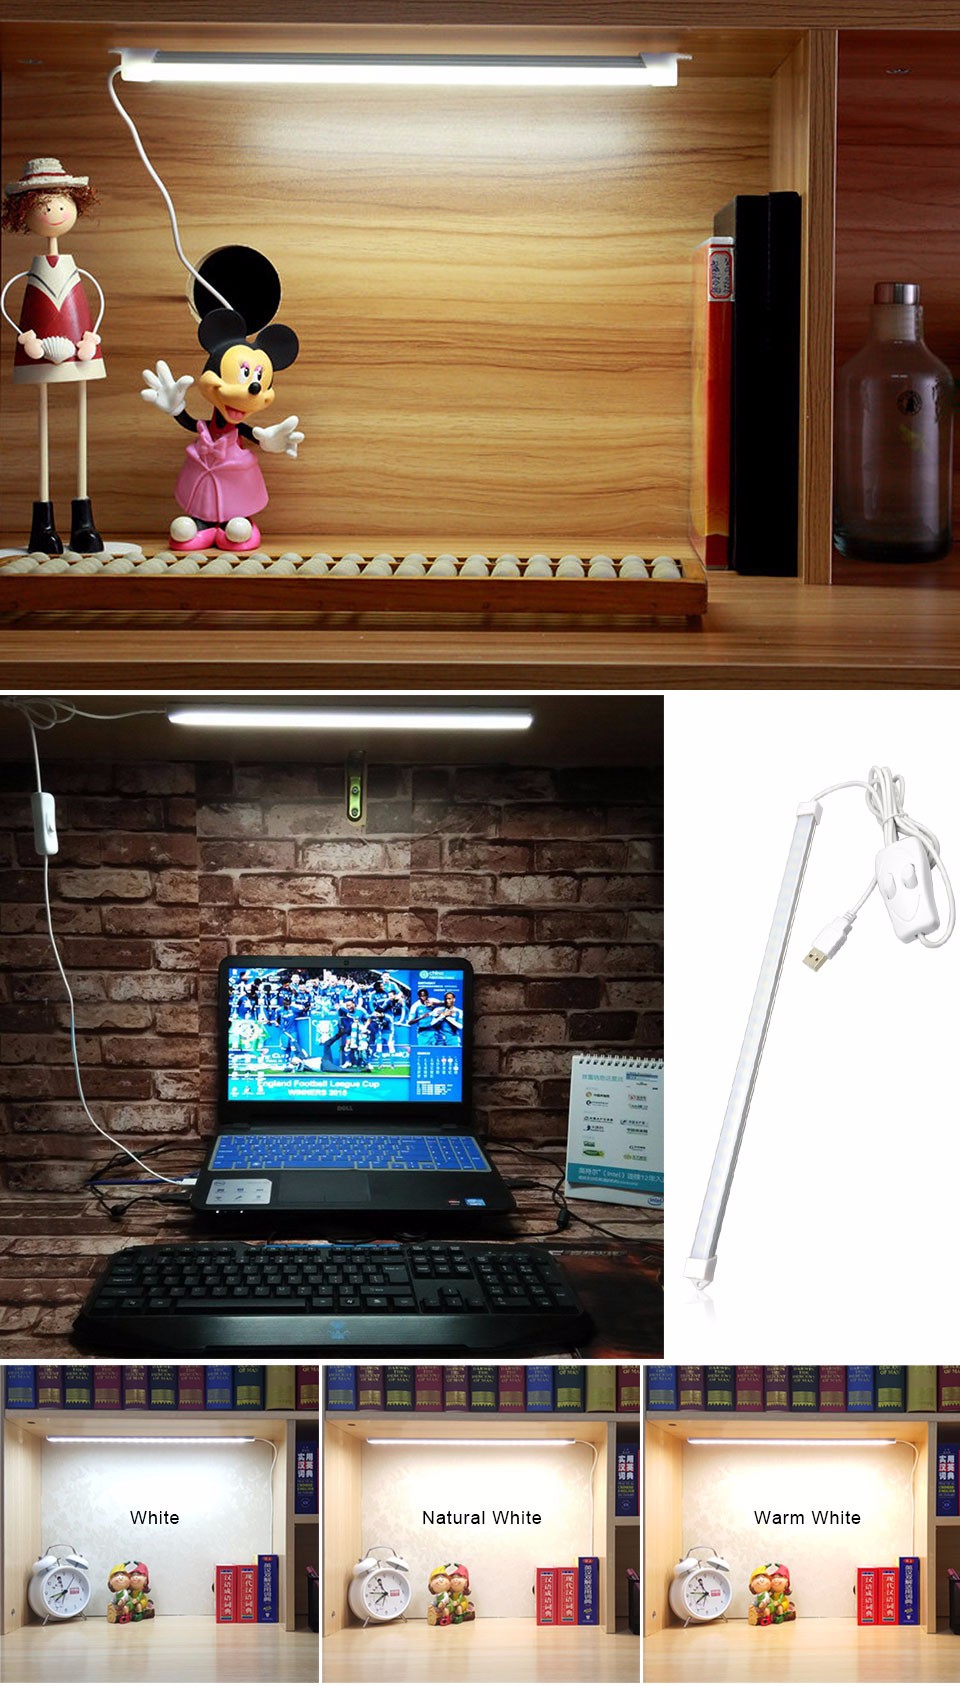 1Pcs USB LED Strip light Three Colors Changeable Rigid Bar Reading Book Desk lamp Switch ON OFF For Camping Night light